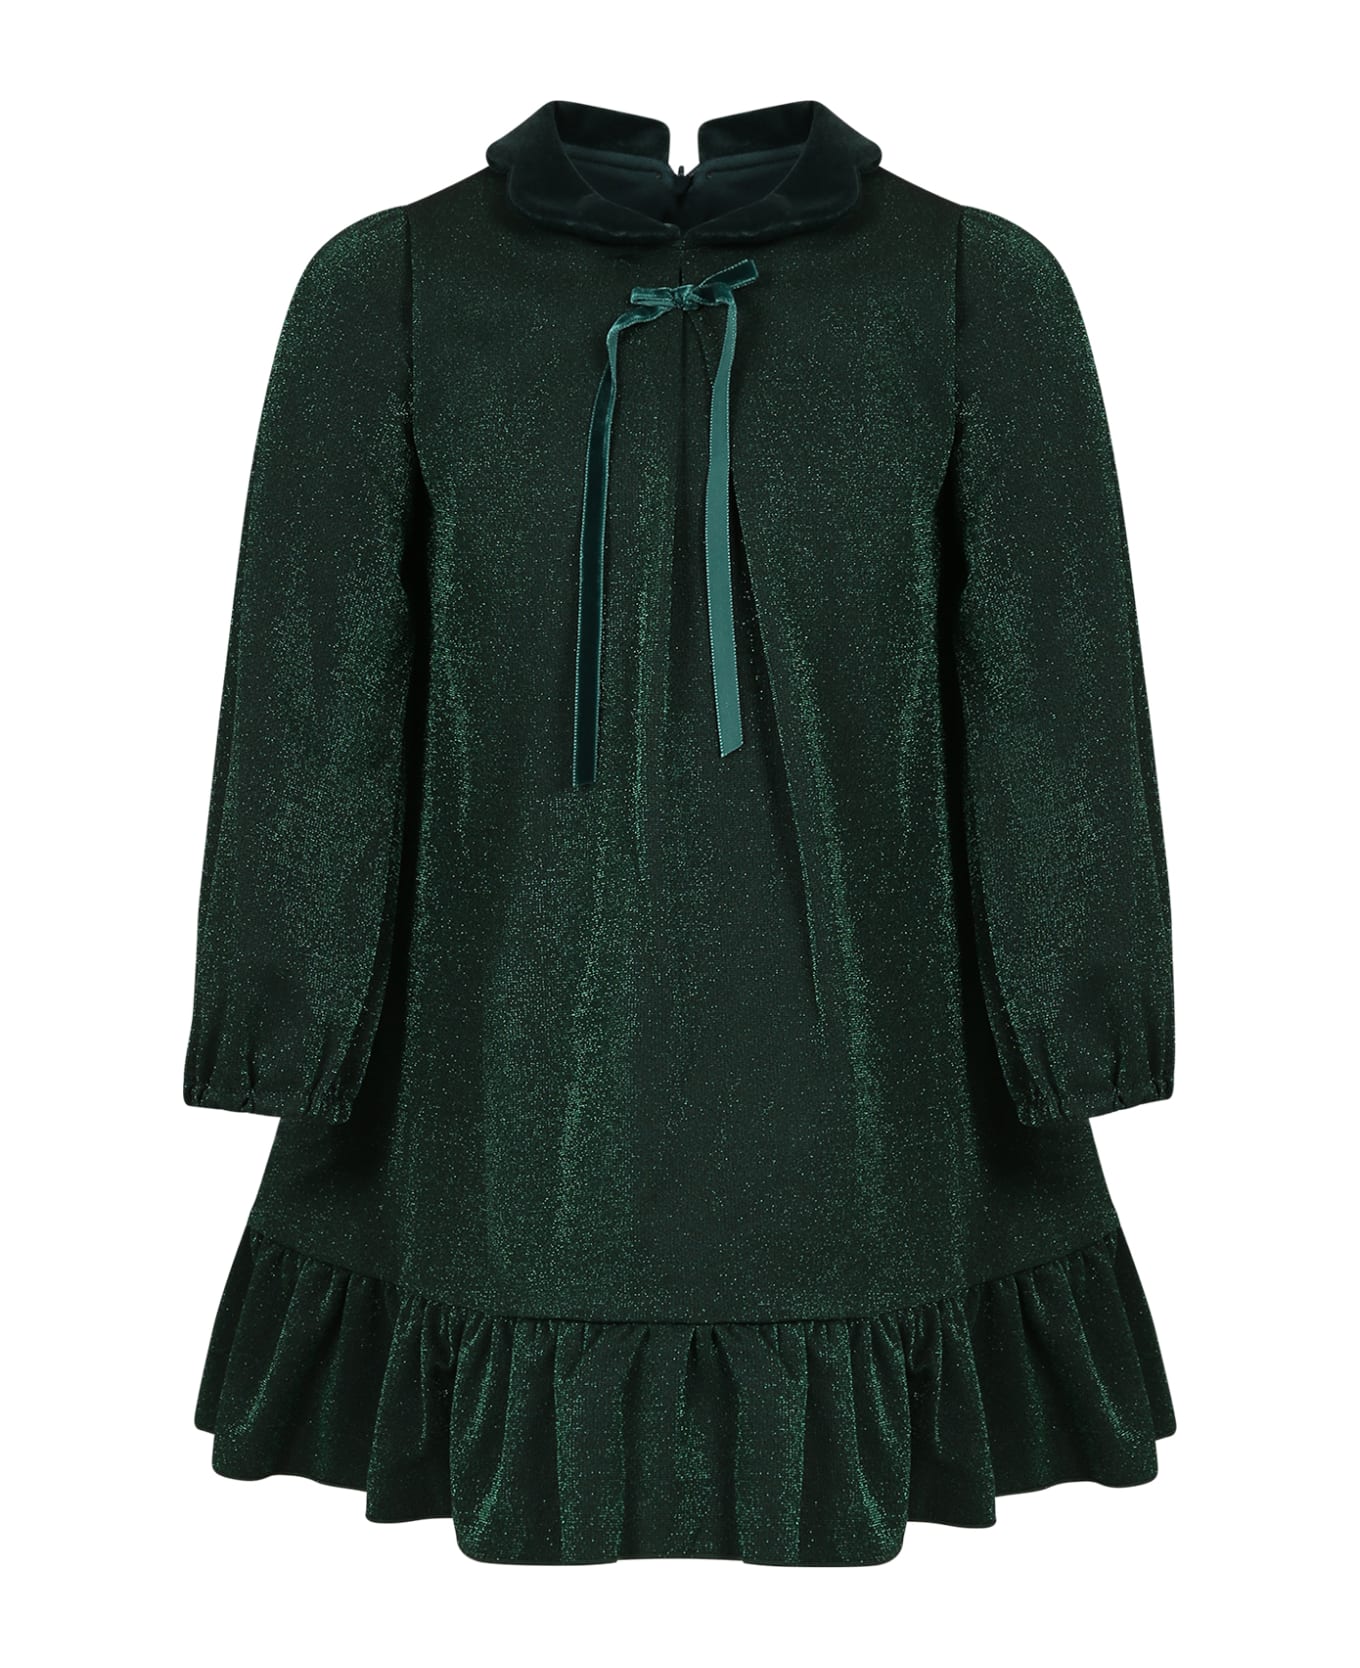 La stupenderia Green Dress For Girl With Bow - Green ワンピース＆ドレス